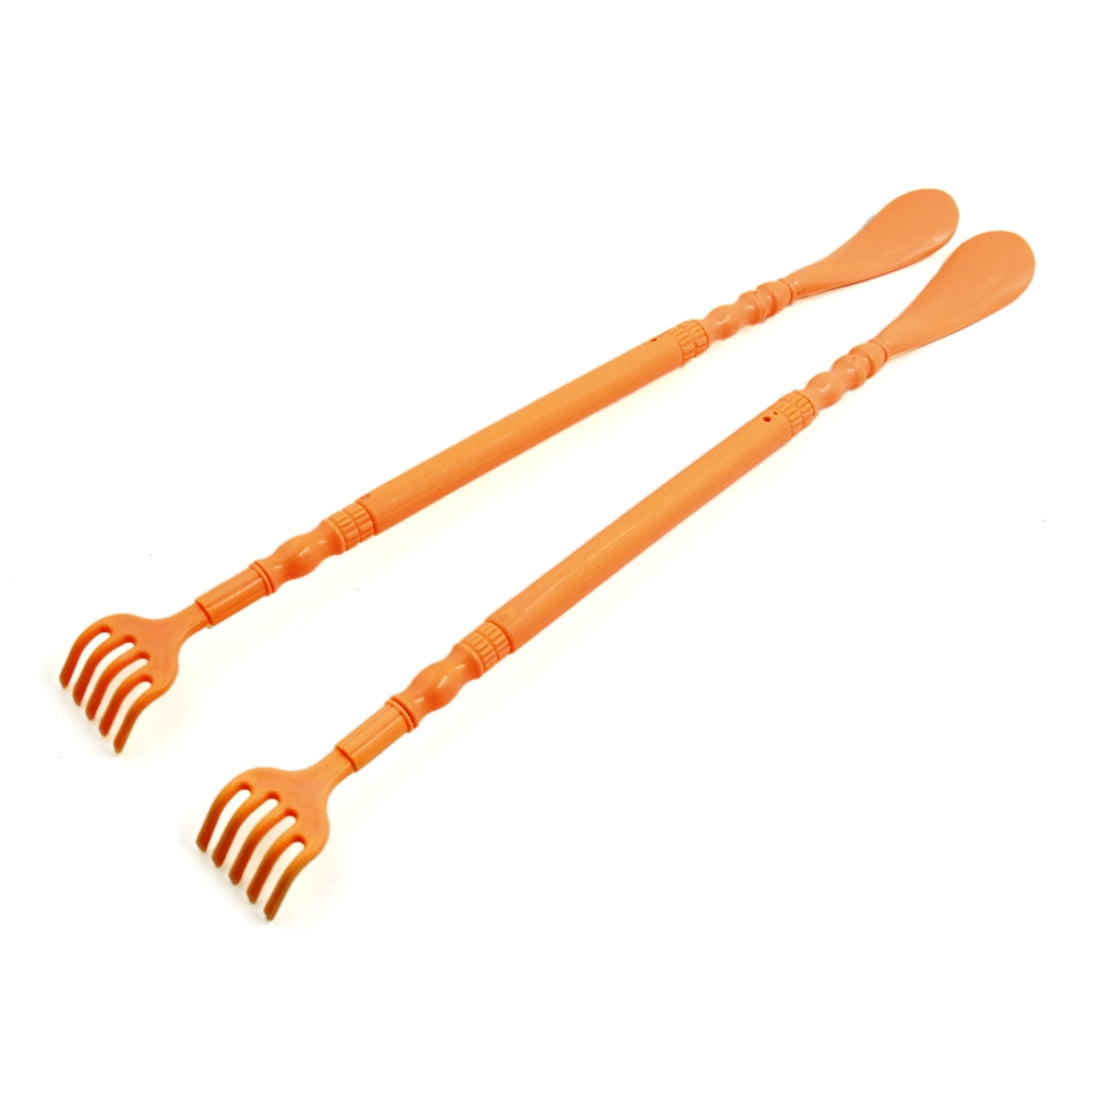 DOBLE TOOL SHOE HORN & BACK SCRATCHER 2 Uses In 1 